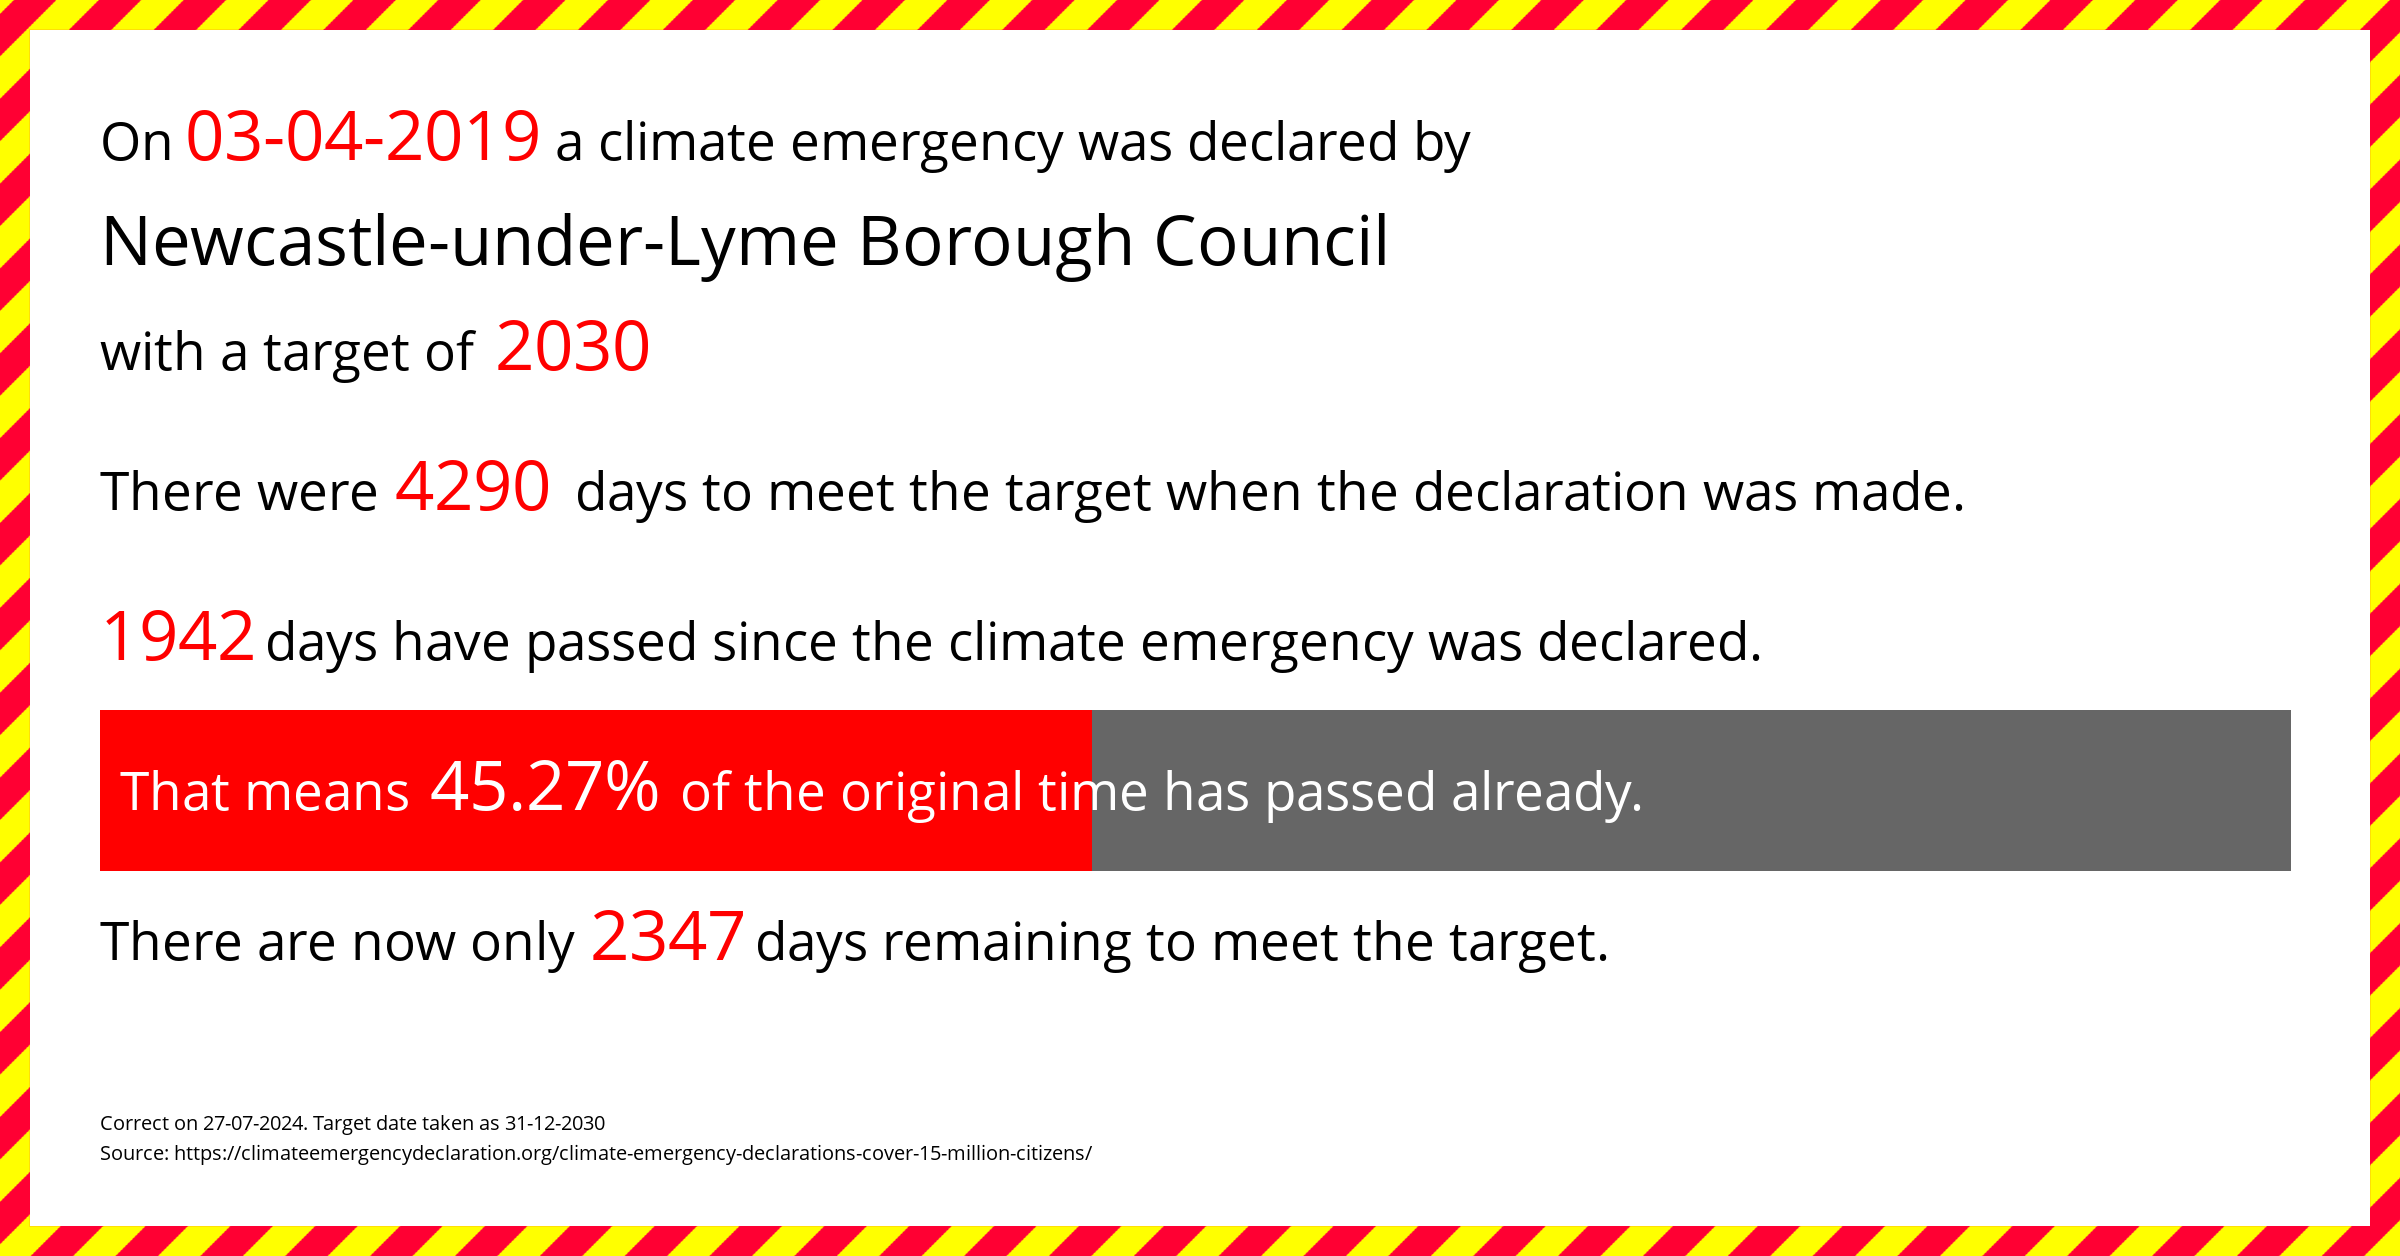 Newcastle-under-Lyme Borough Council declared a Climate emergency on Wednesday 3rd April 2019, with a target of 2030.